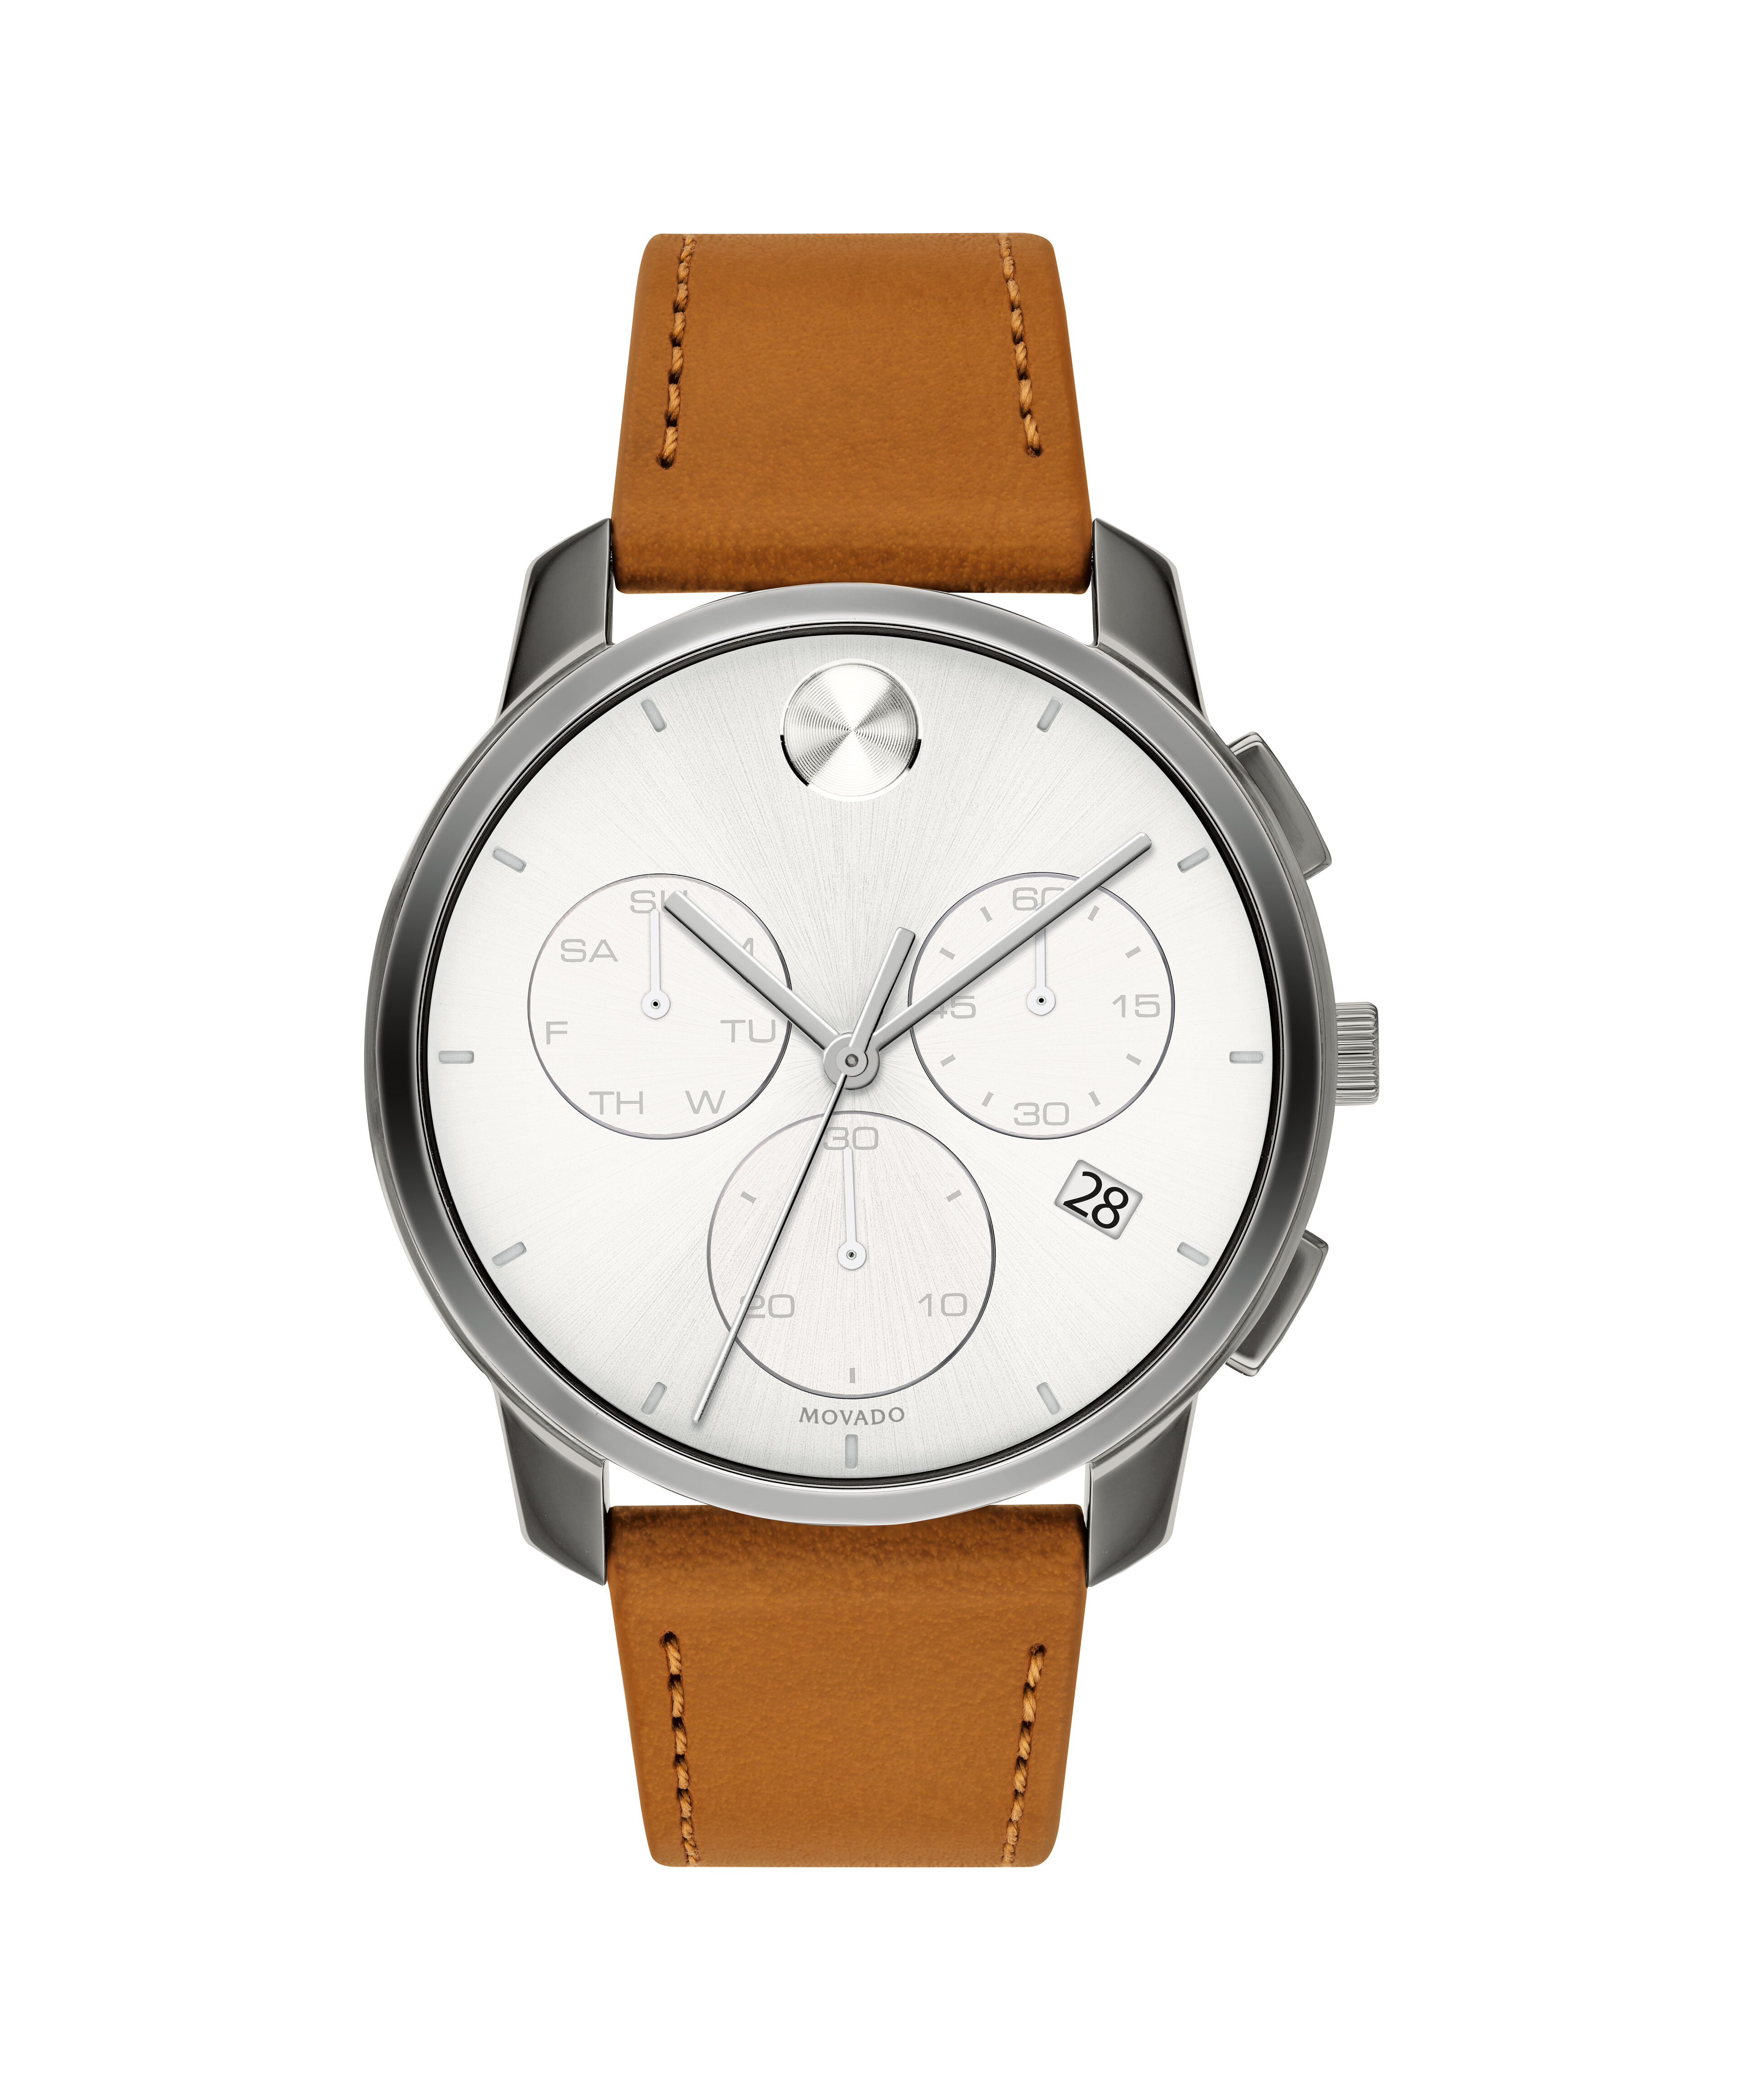 Replica Smart Turnout Watches